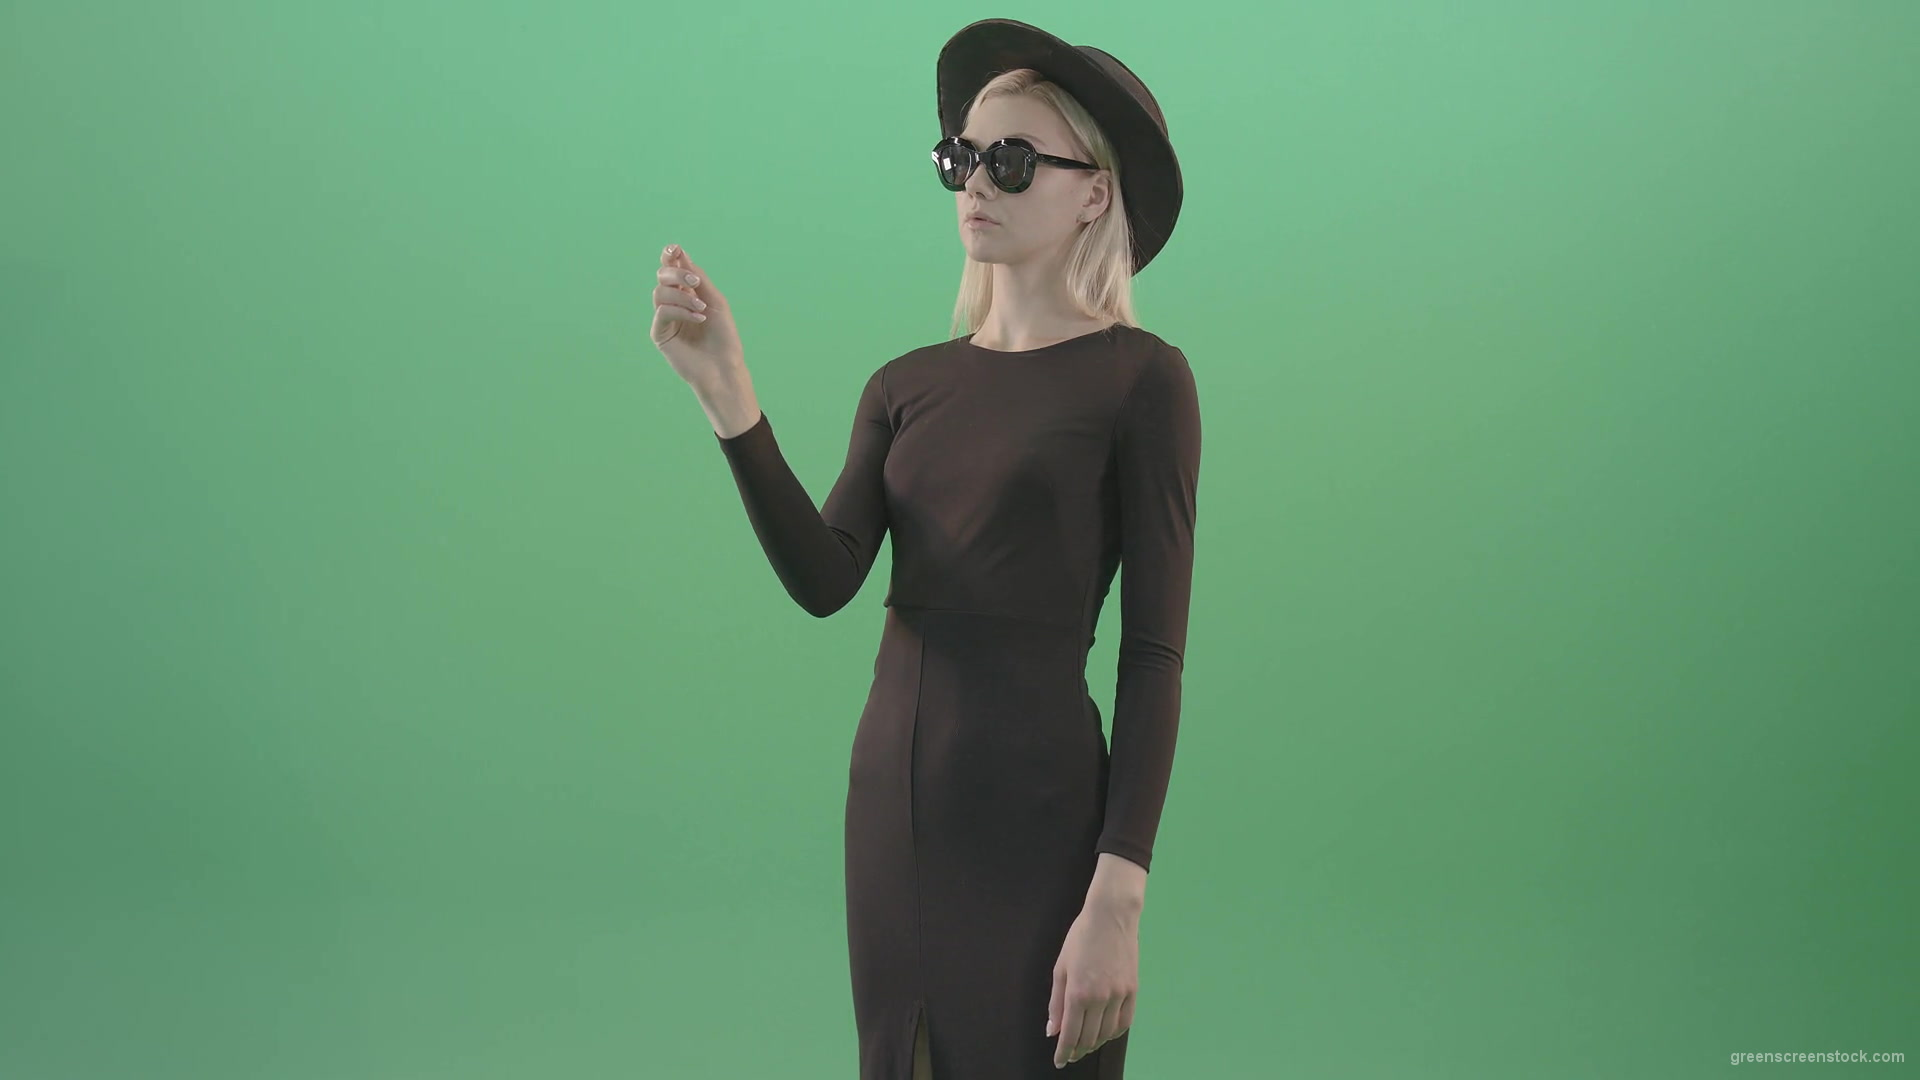 Awesome-beautiful-luxury-women-in-black-dress-shopping-virtual-products-on-touch-screen-4K-Green-Screen-Video-Footage-1920_004 Green Screen Stock